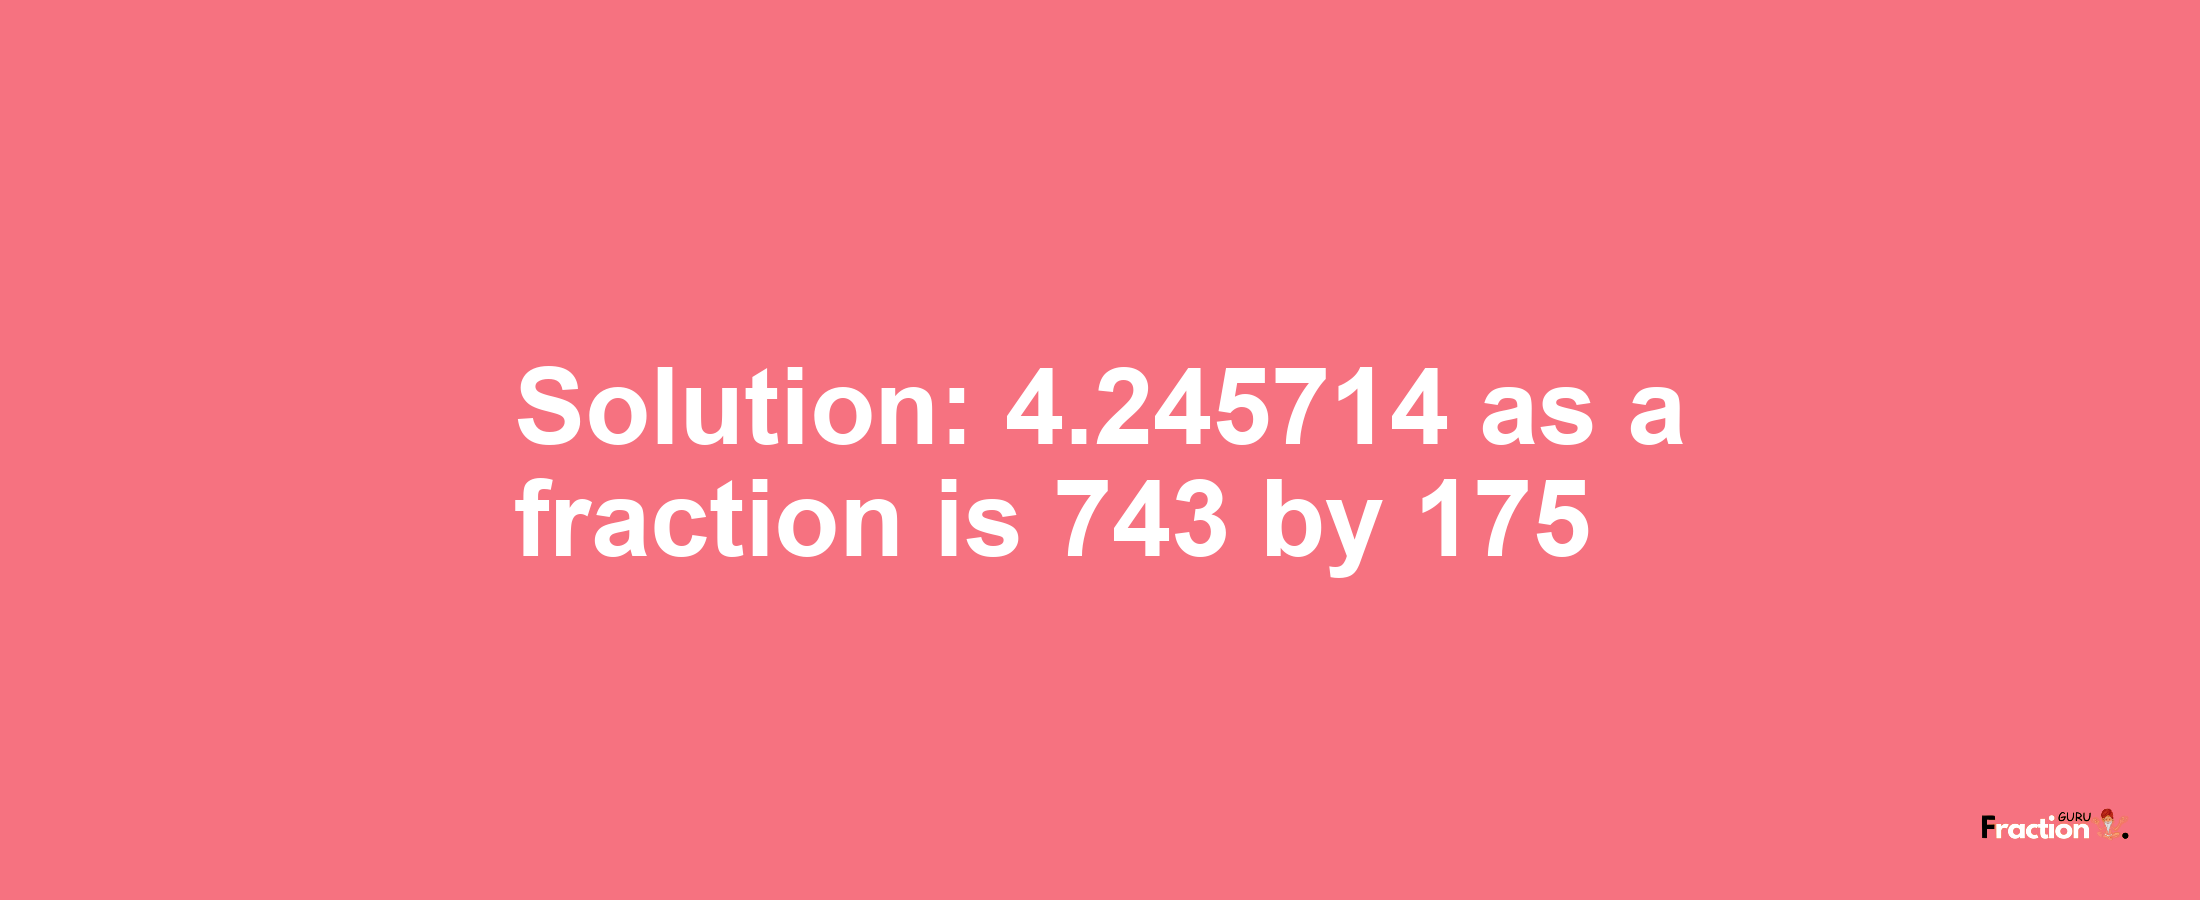 Solution:4.245714 as a fraction is 743/175